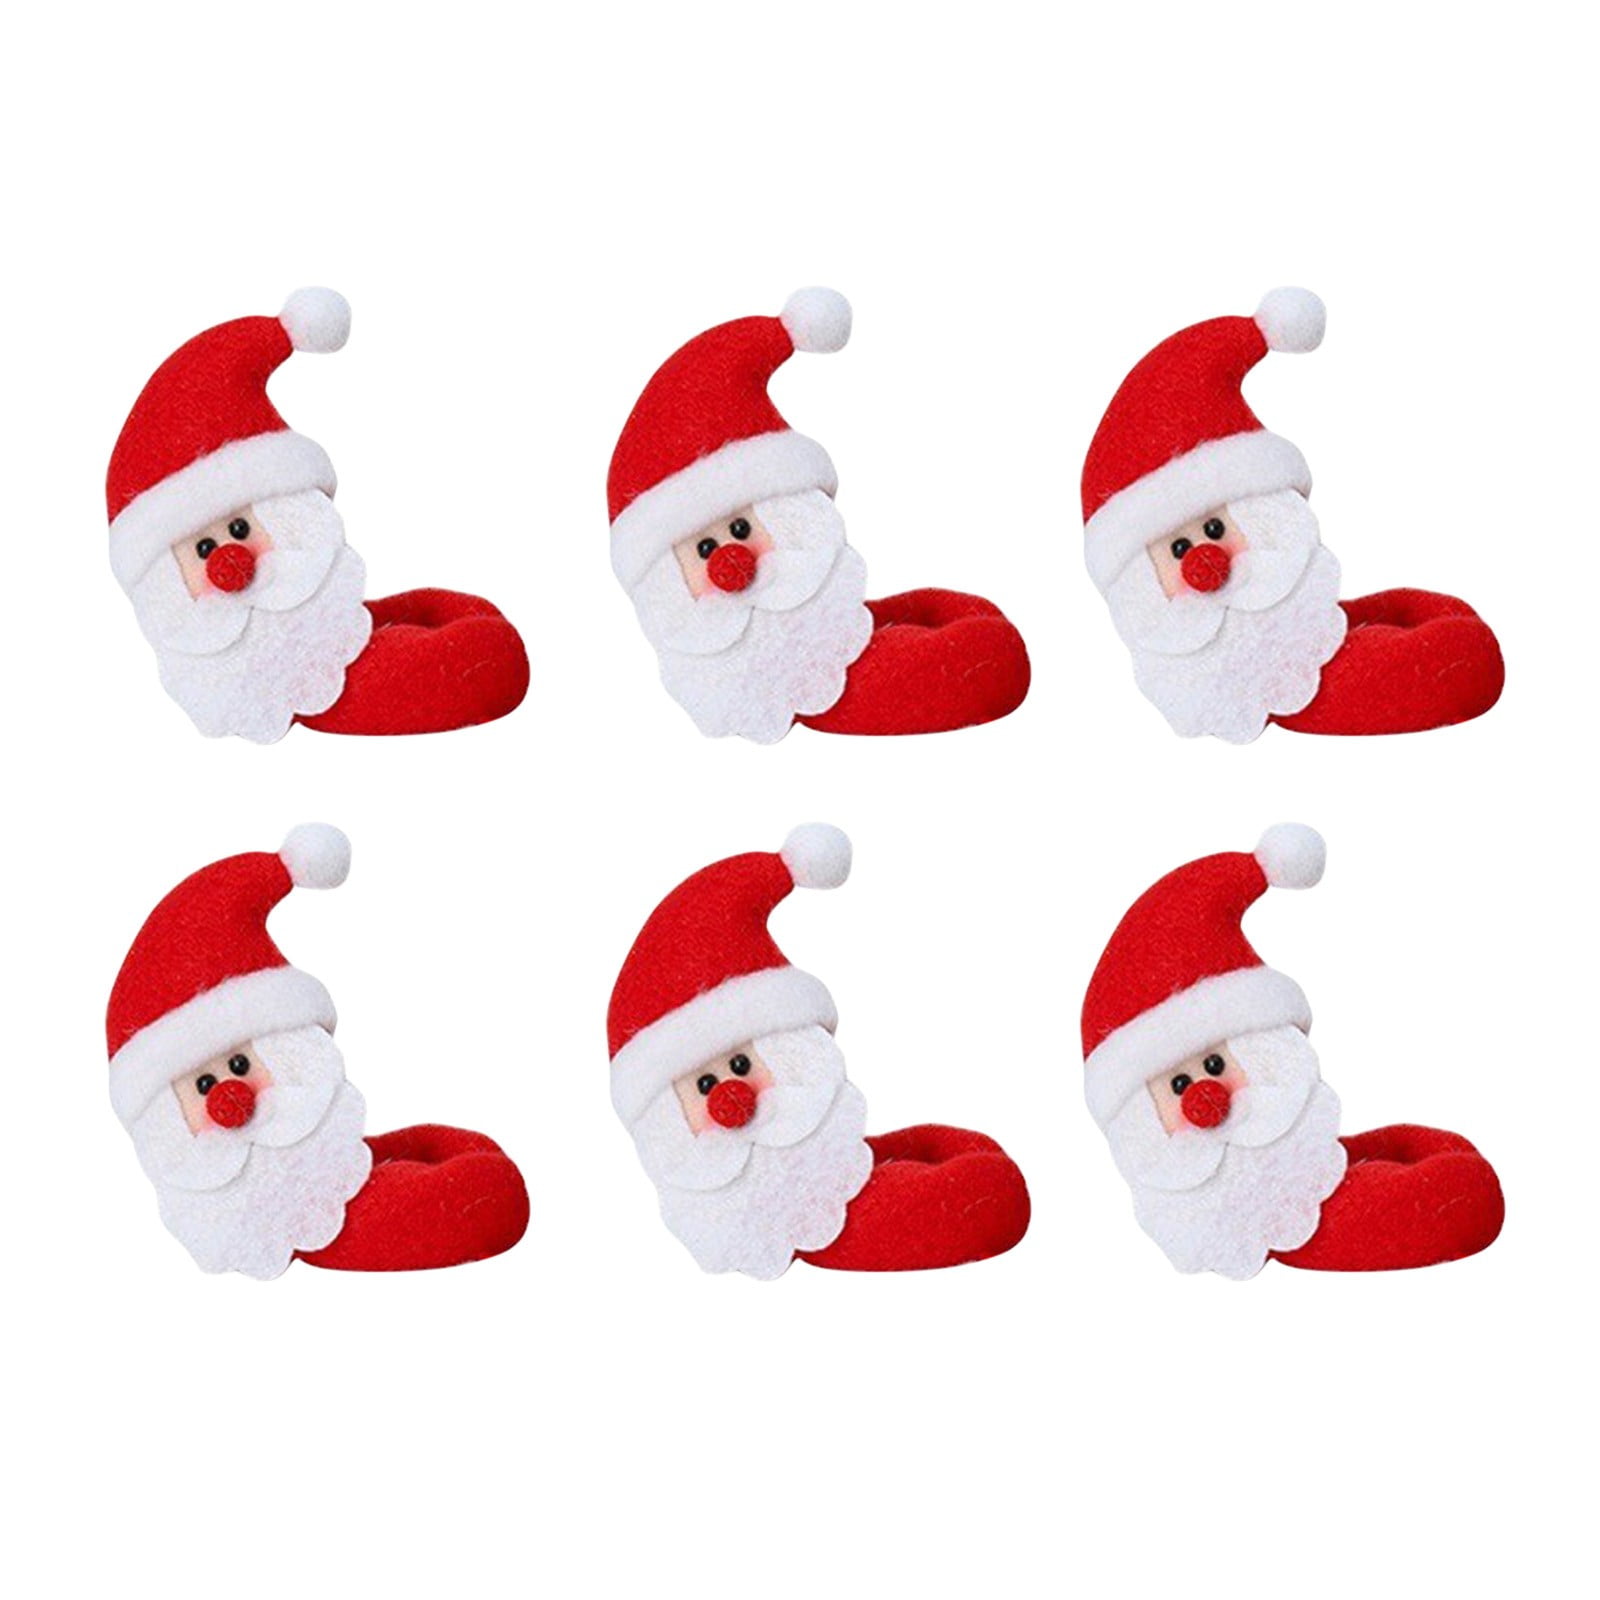 6 pcs Tuzech Santa Claus Cap Chair Cover Set of 6 PCS Snowman Red Hat Chair Back Covers Non Woven Chair Back Cover Sets Christmas Dinner Decorations